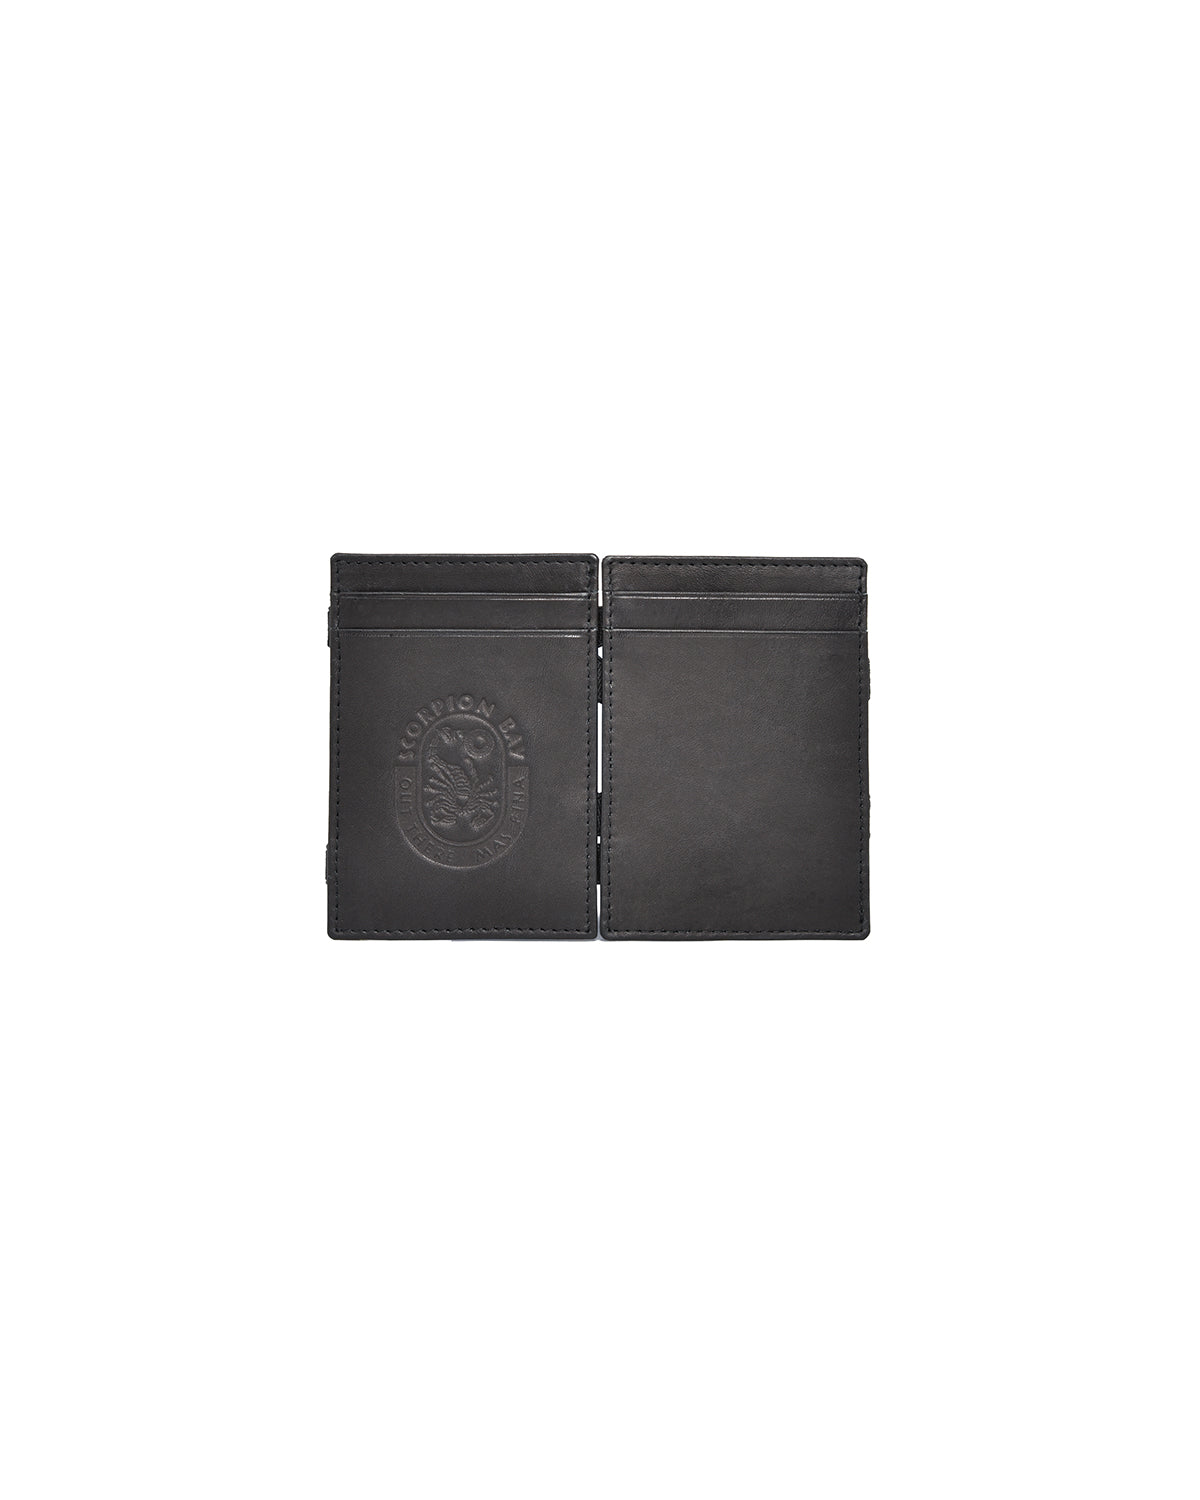 Black Leather Magic Wallet With Elastic Bands